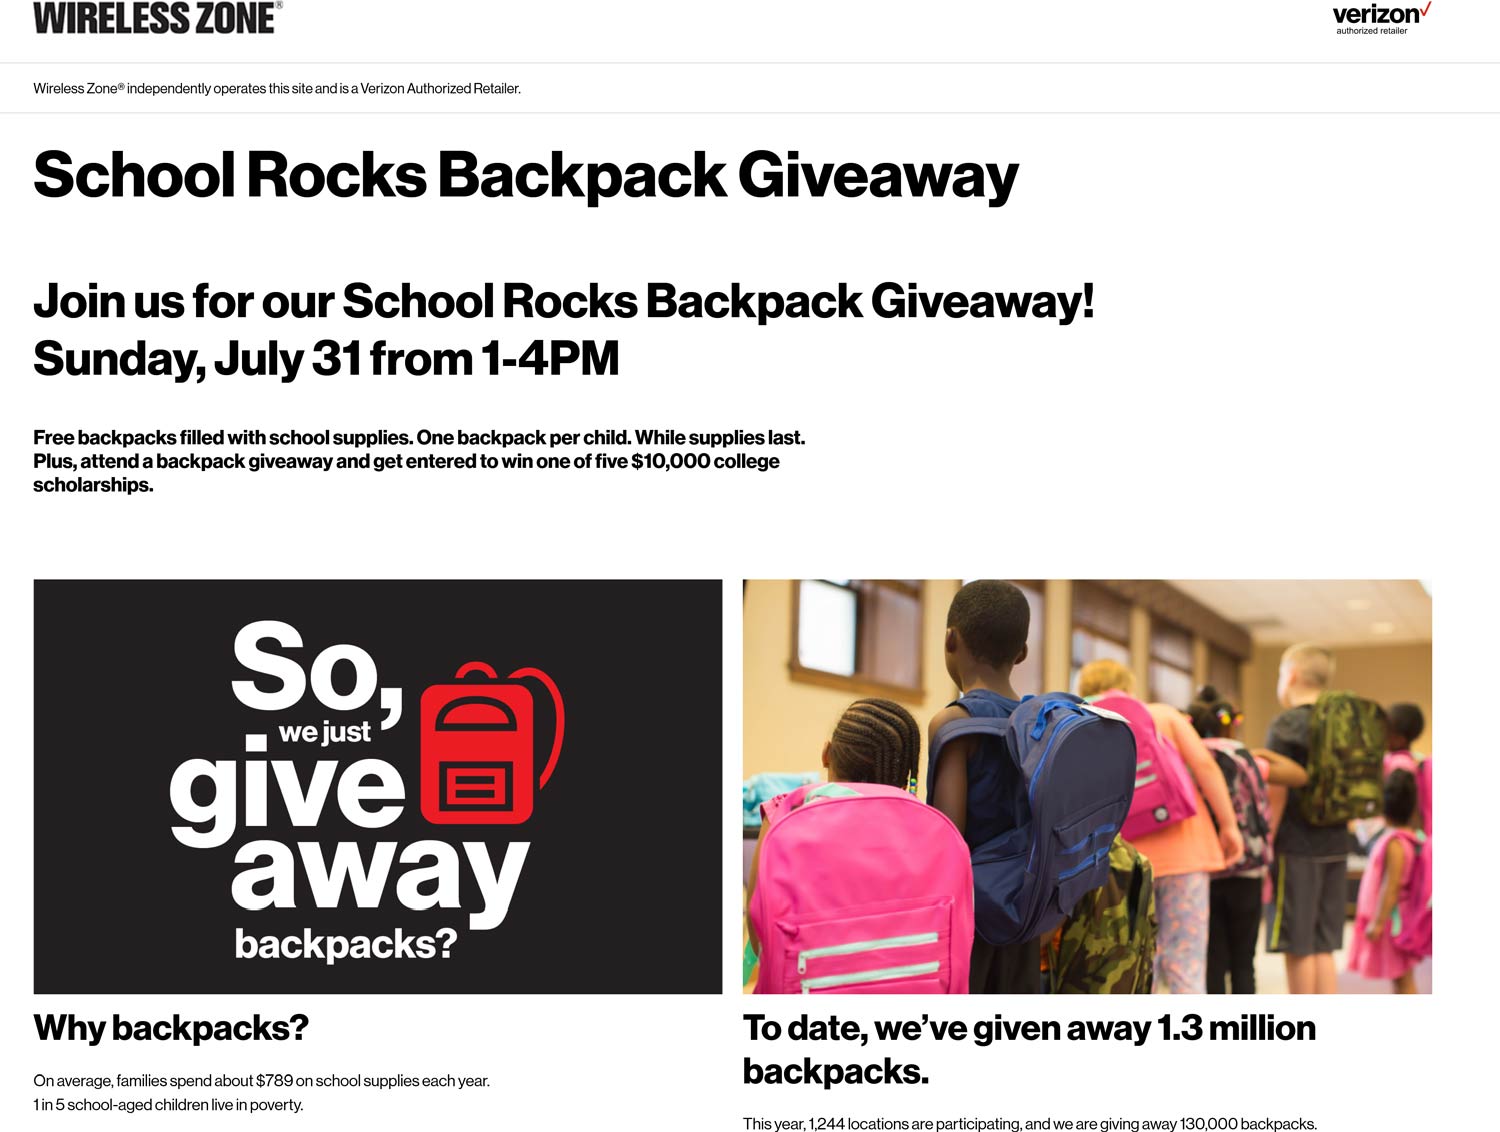 Wireless Zone stores Coupon  Free backpack of school supplies 1-4p the 31st at Verizon Wireless Zone locations #wirelesszone 